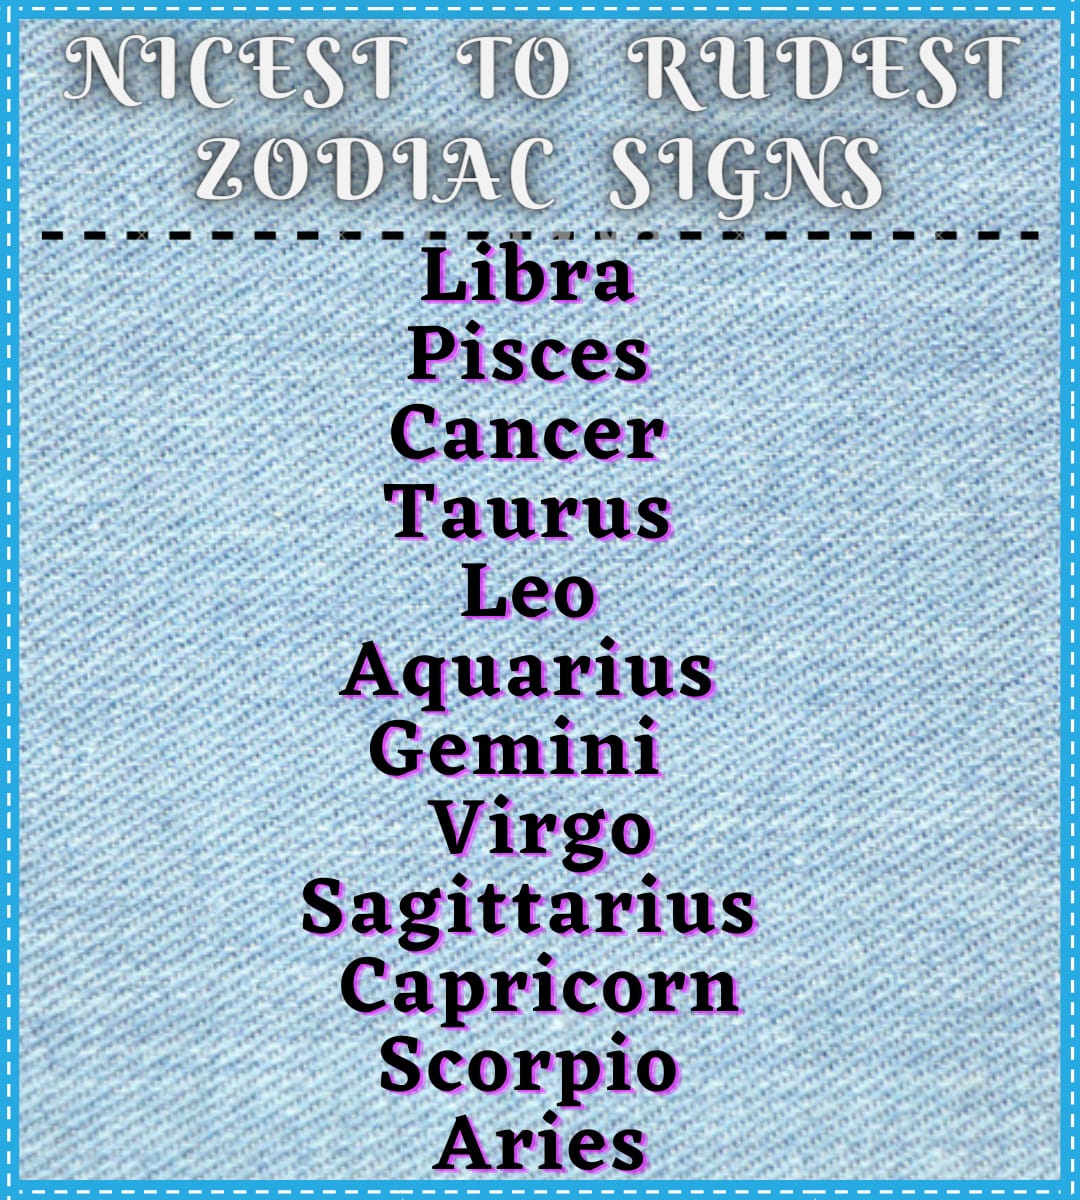 Top 6 Rudest Zodiac Signs From Inside According To Astrologers ...